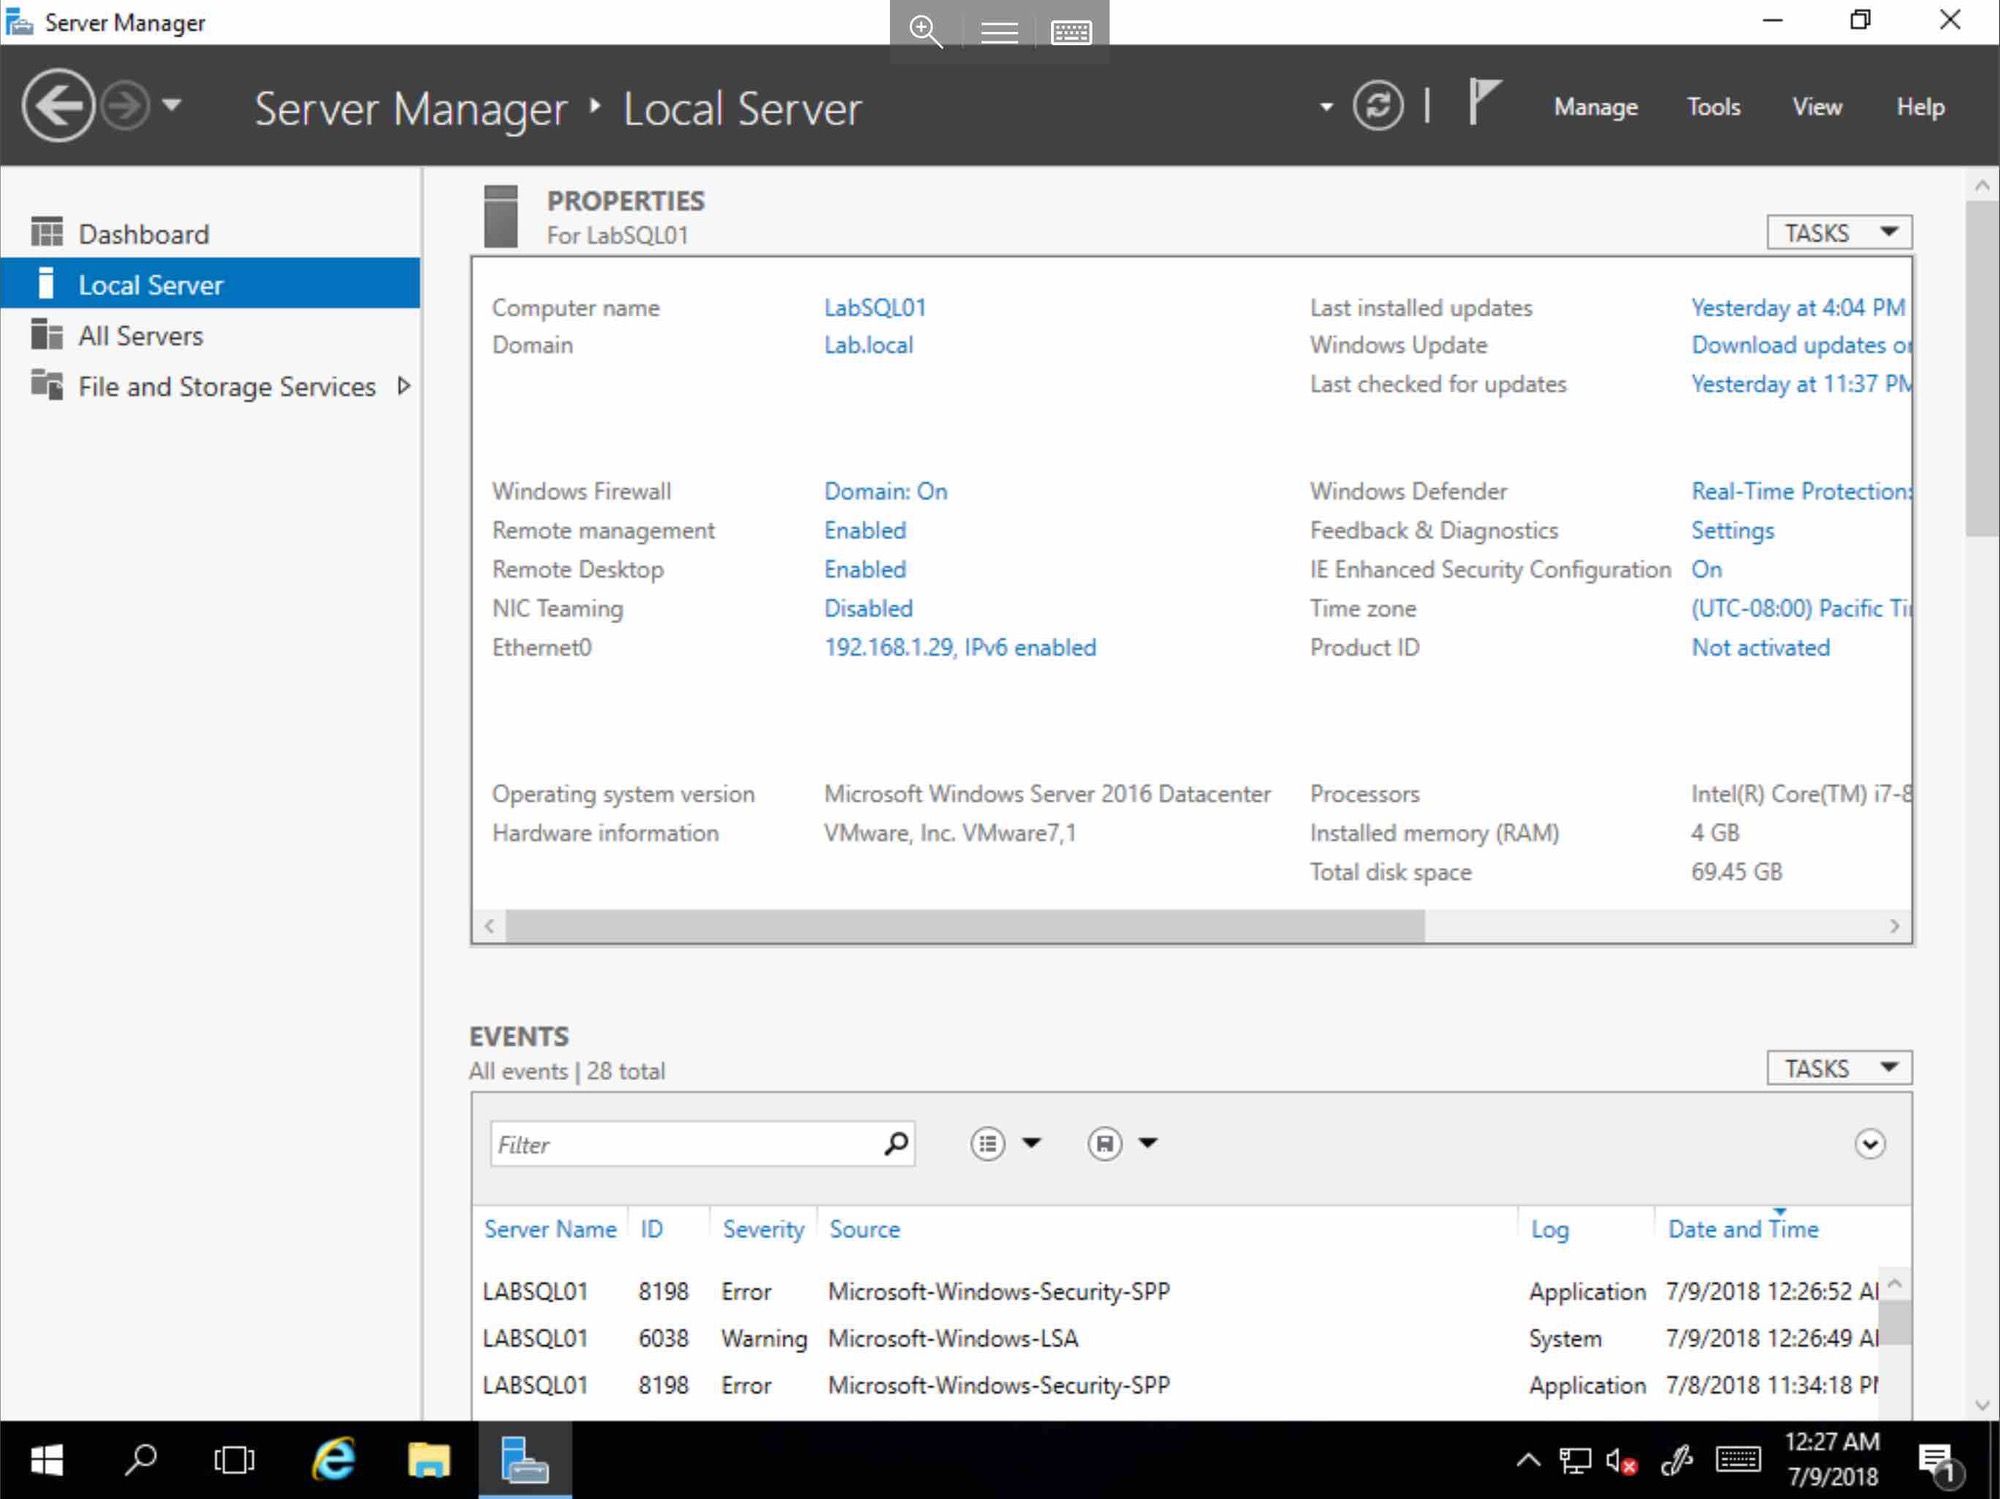 Screenshot of Server Manager Console